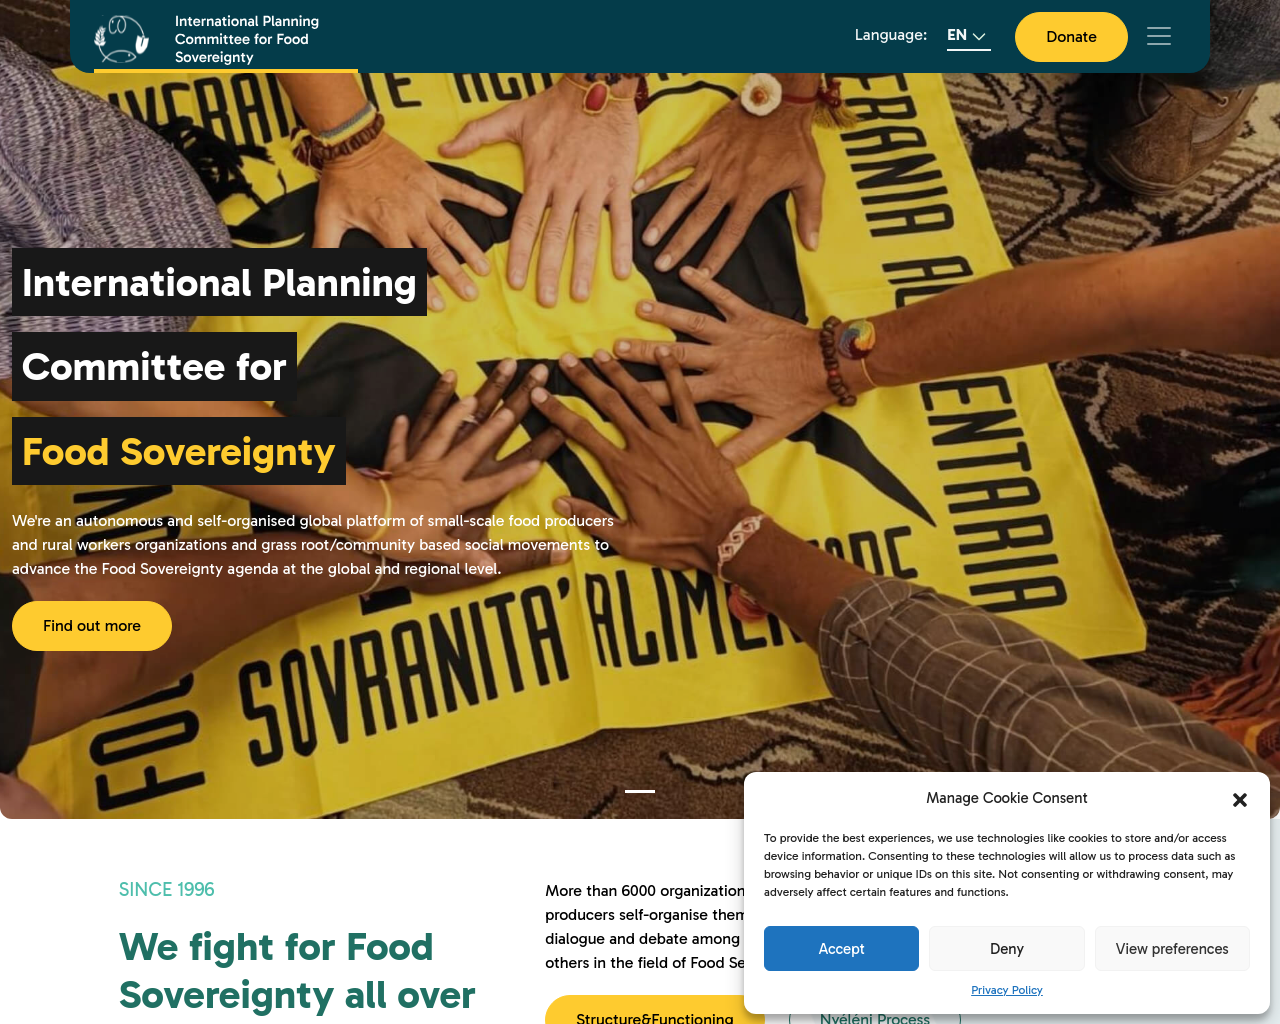 foodsovereignty.org